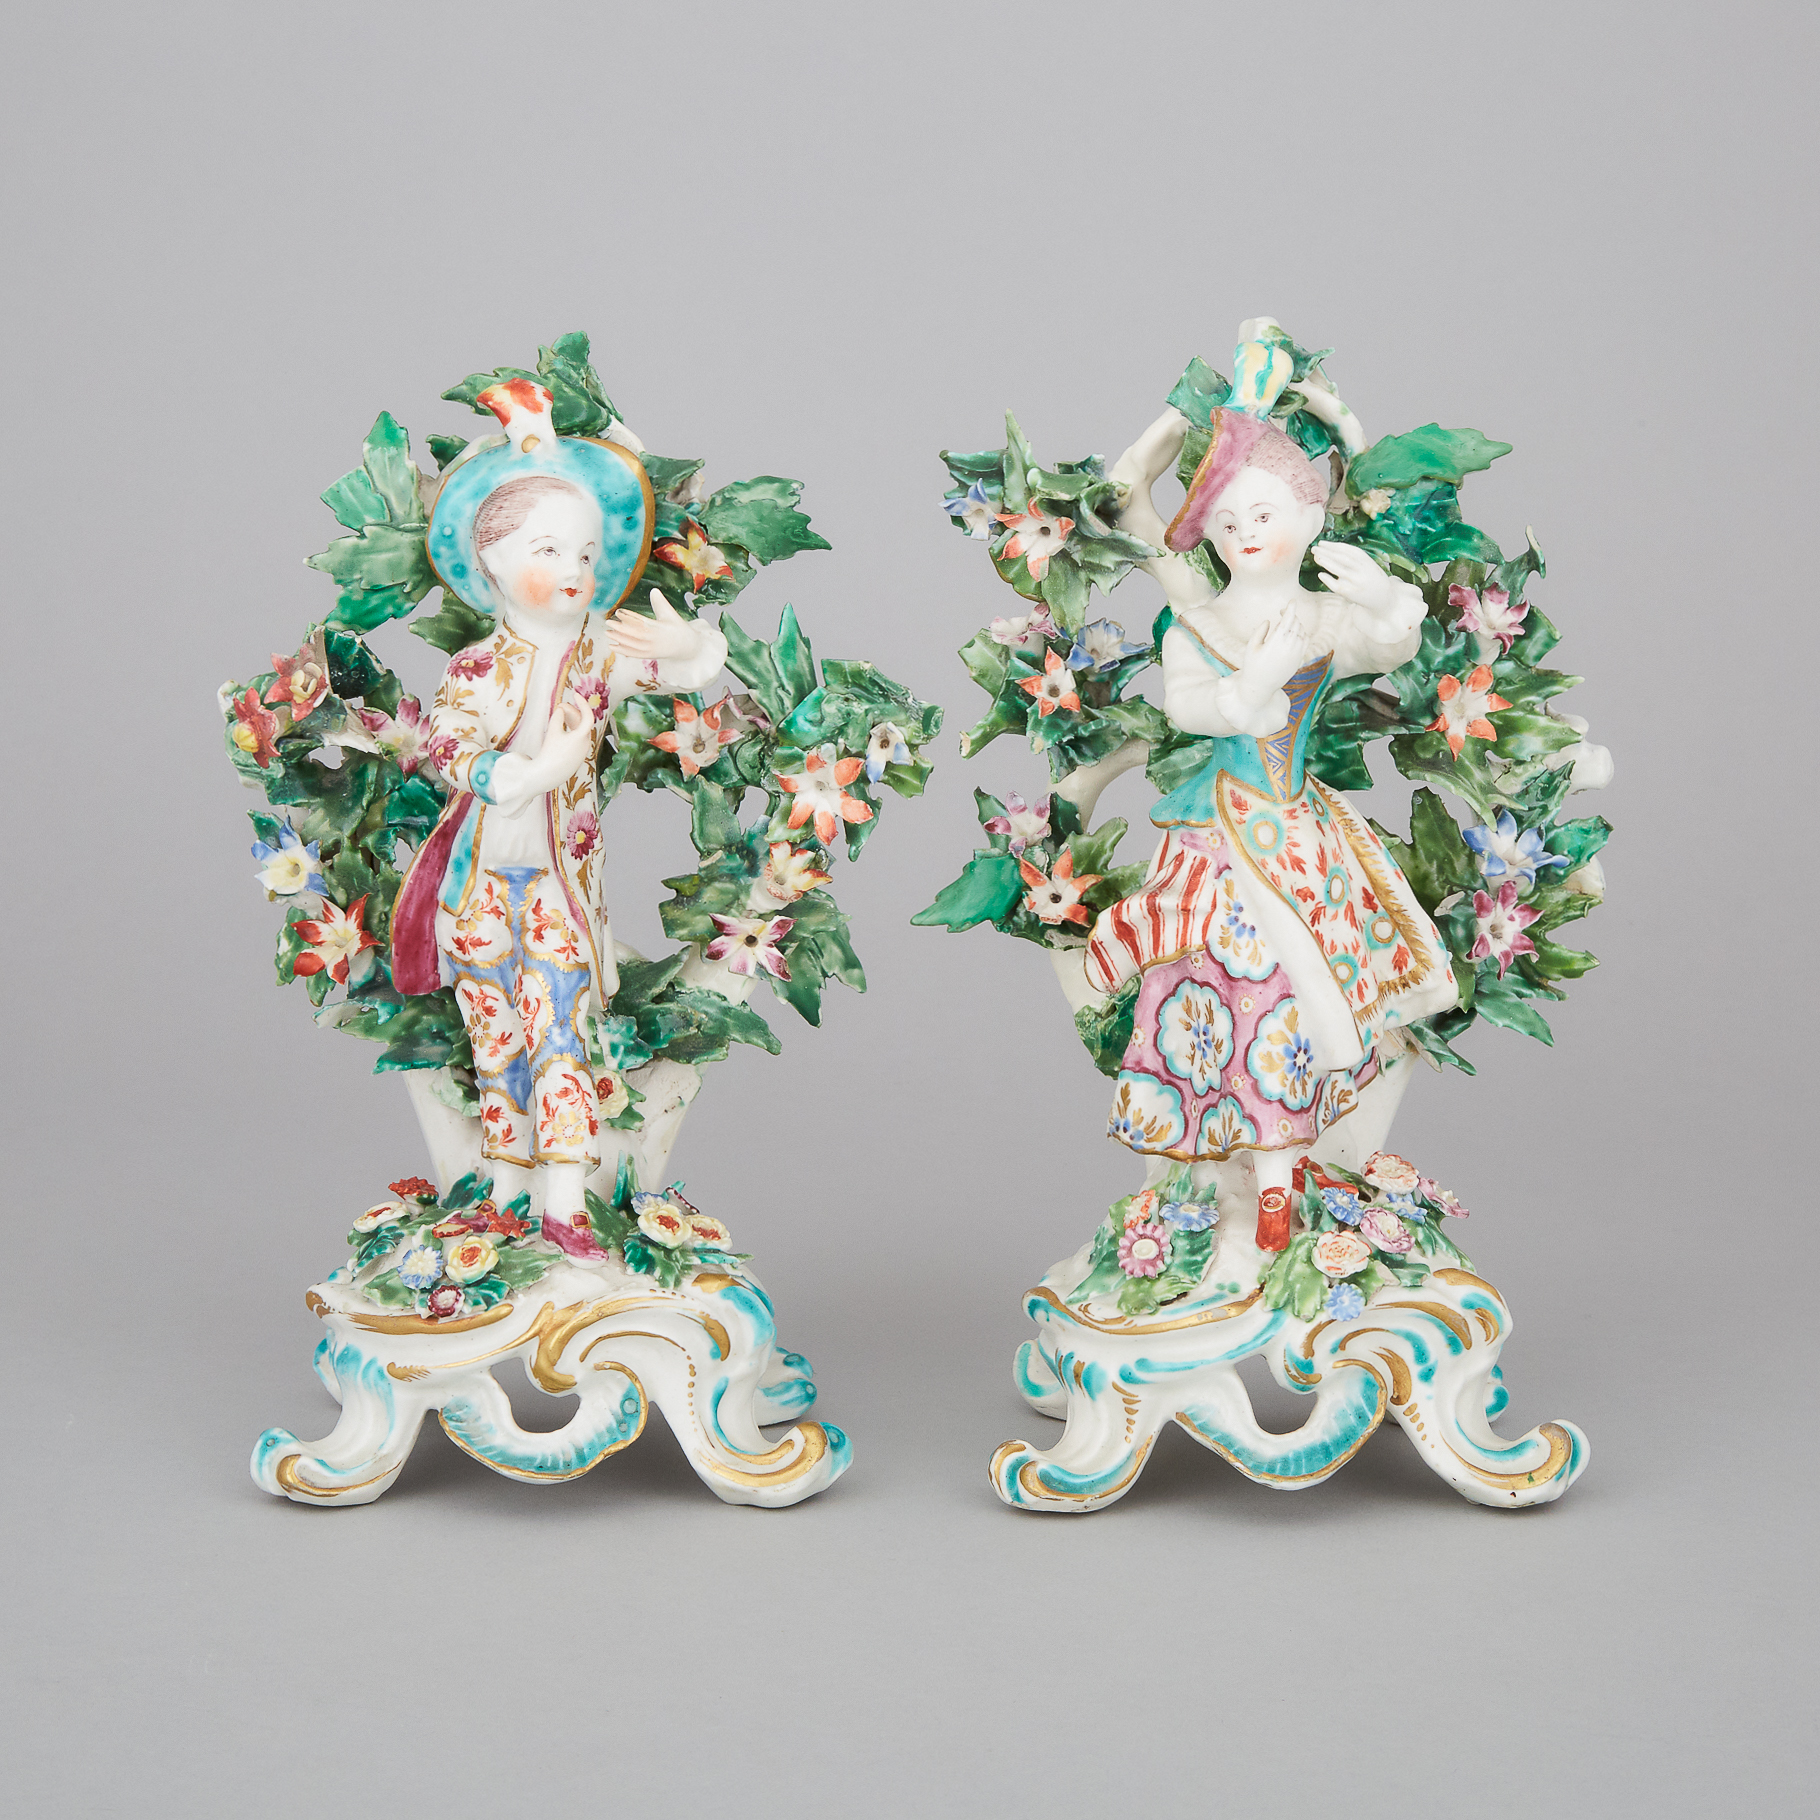 Pair of Bow Figures of 'New Dancers', c.1770